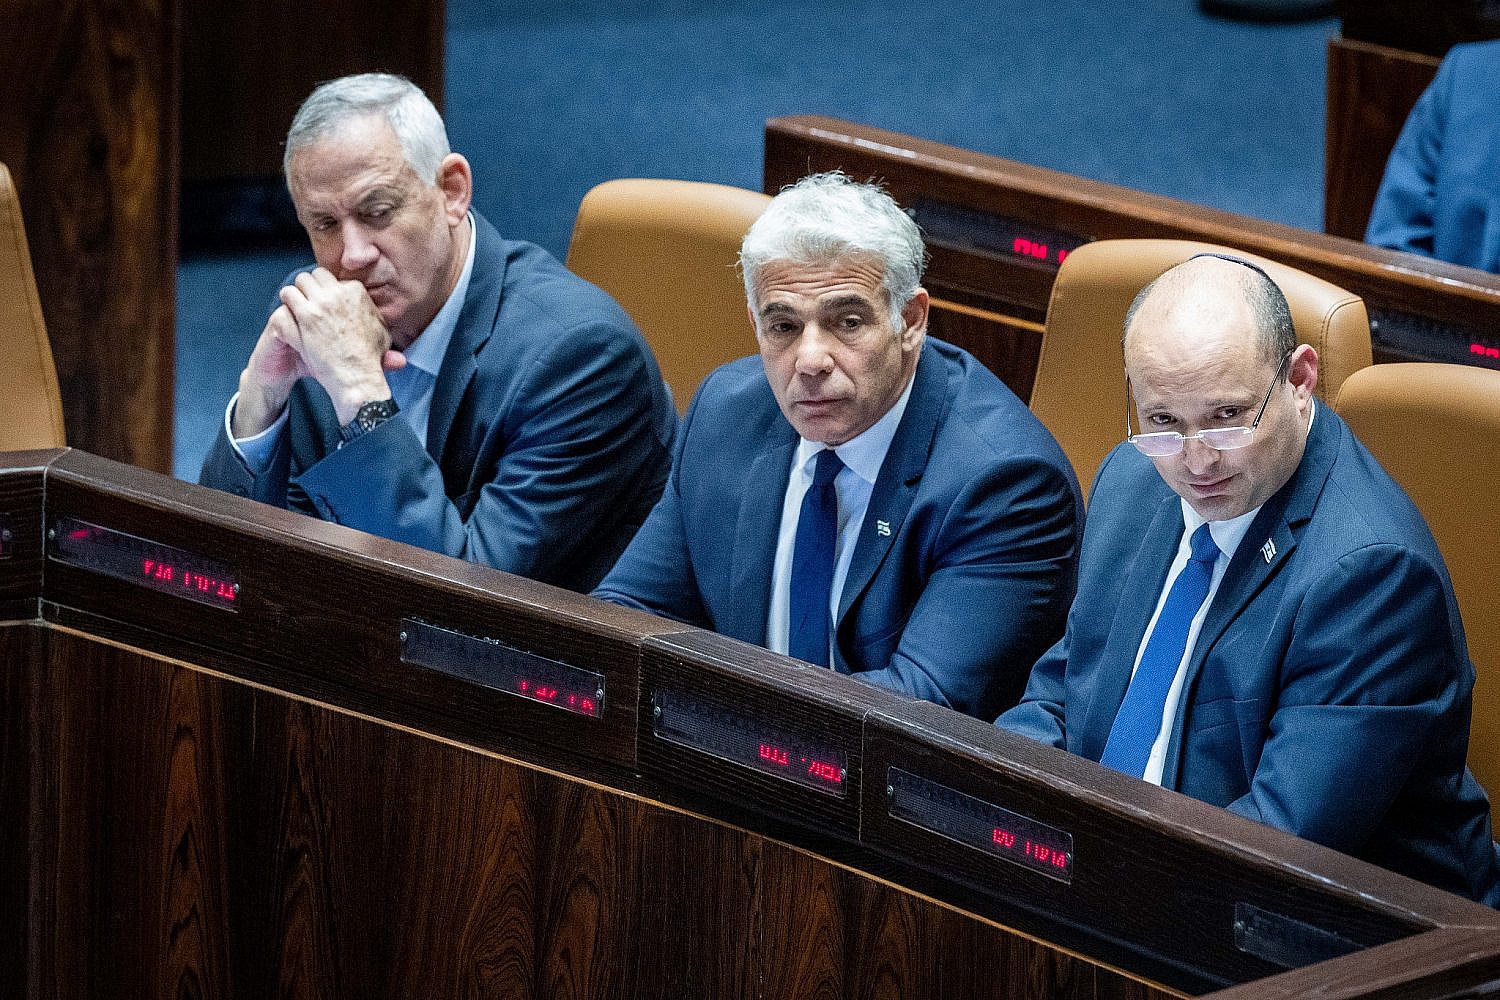 Israeli prime minister Naftali Bennett, Foreign Affairs Minister Yair Lapid, and Defense Minister Benny Gantz seen during a discussion on the vote on the "settler law bill" at the Knesset, Jerusalem, June 6, 2022. (Yonatan Sindel/Flash90)